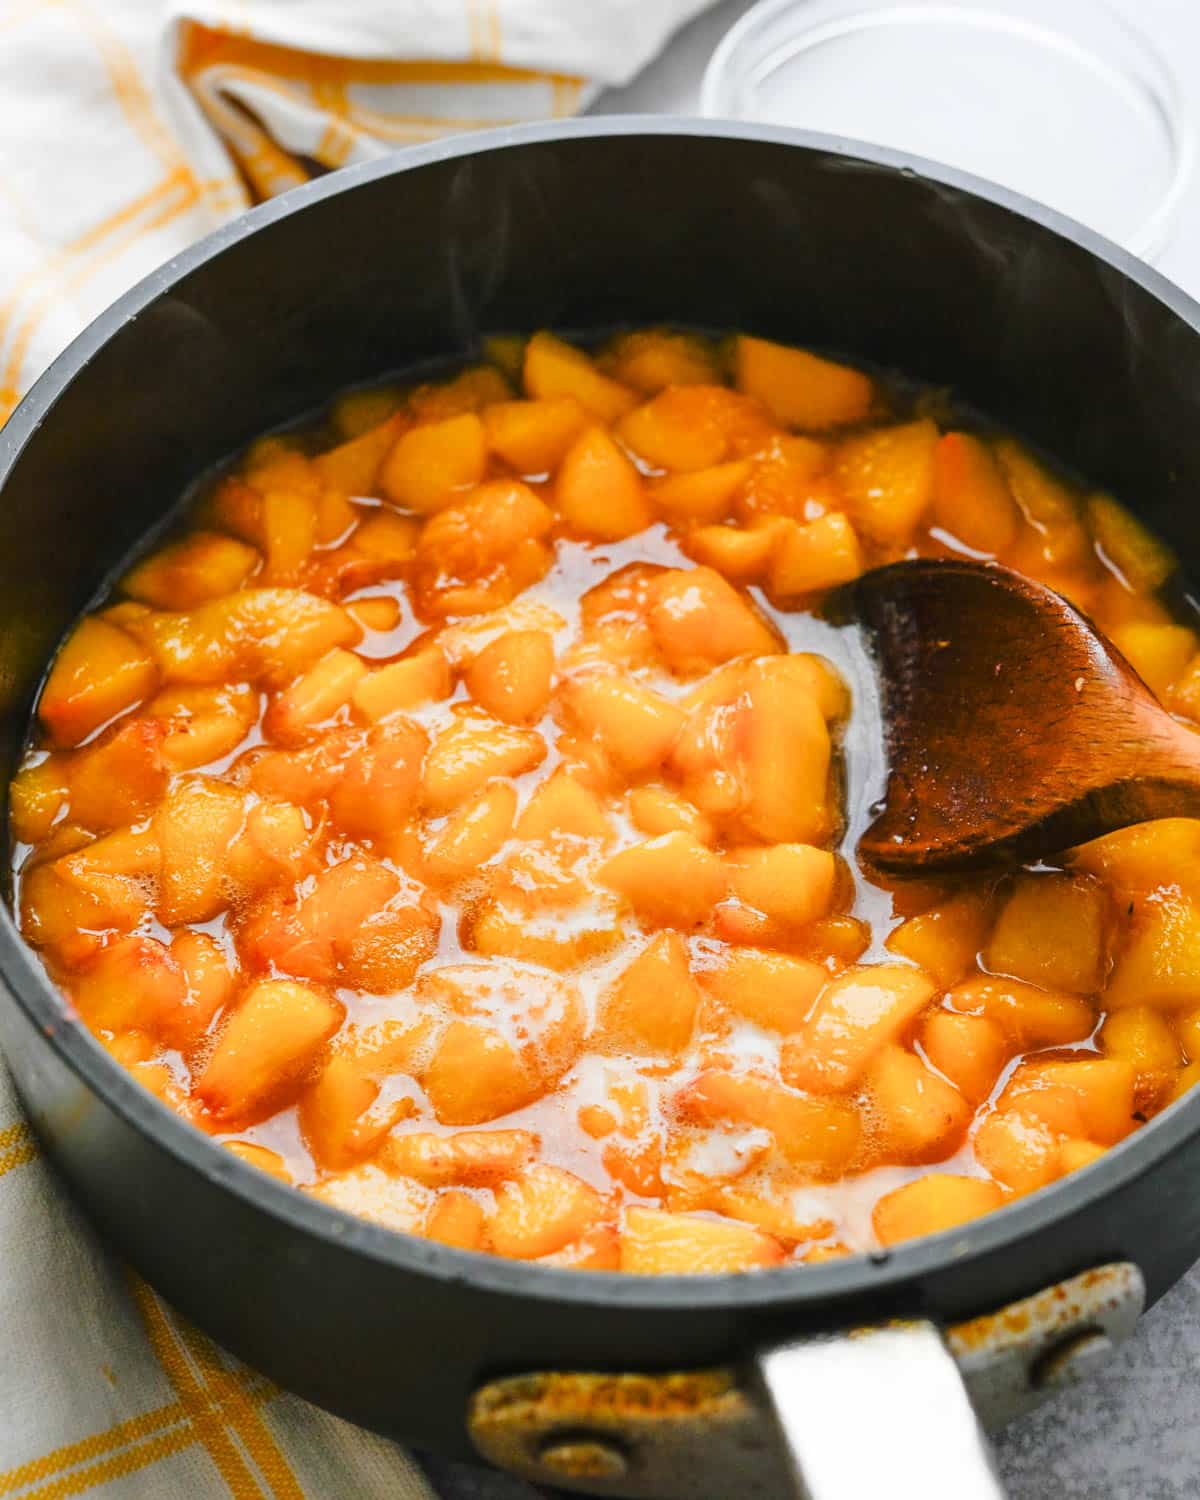 I am cooking chopped peaches in a saucepan with sugar and cornstarch slurry.